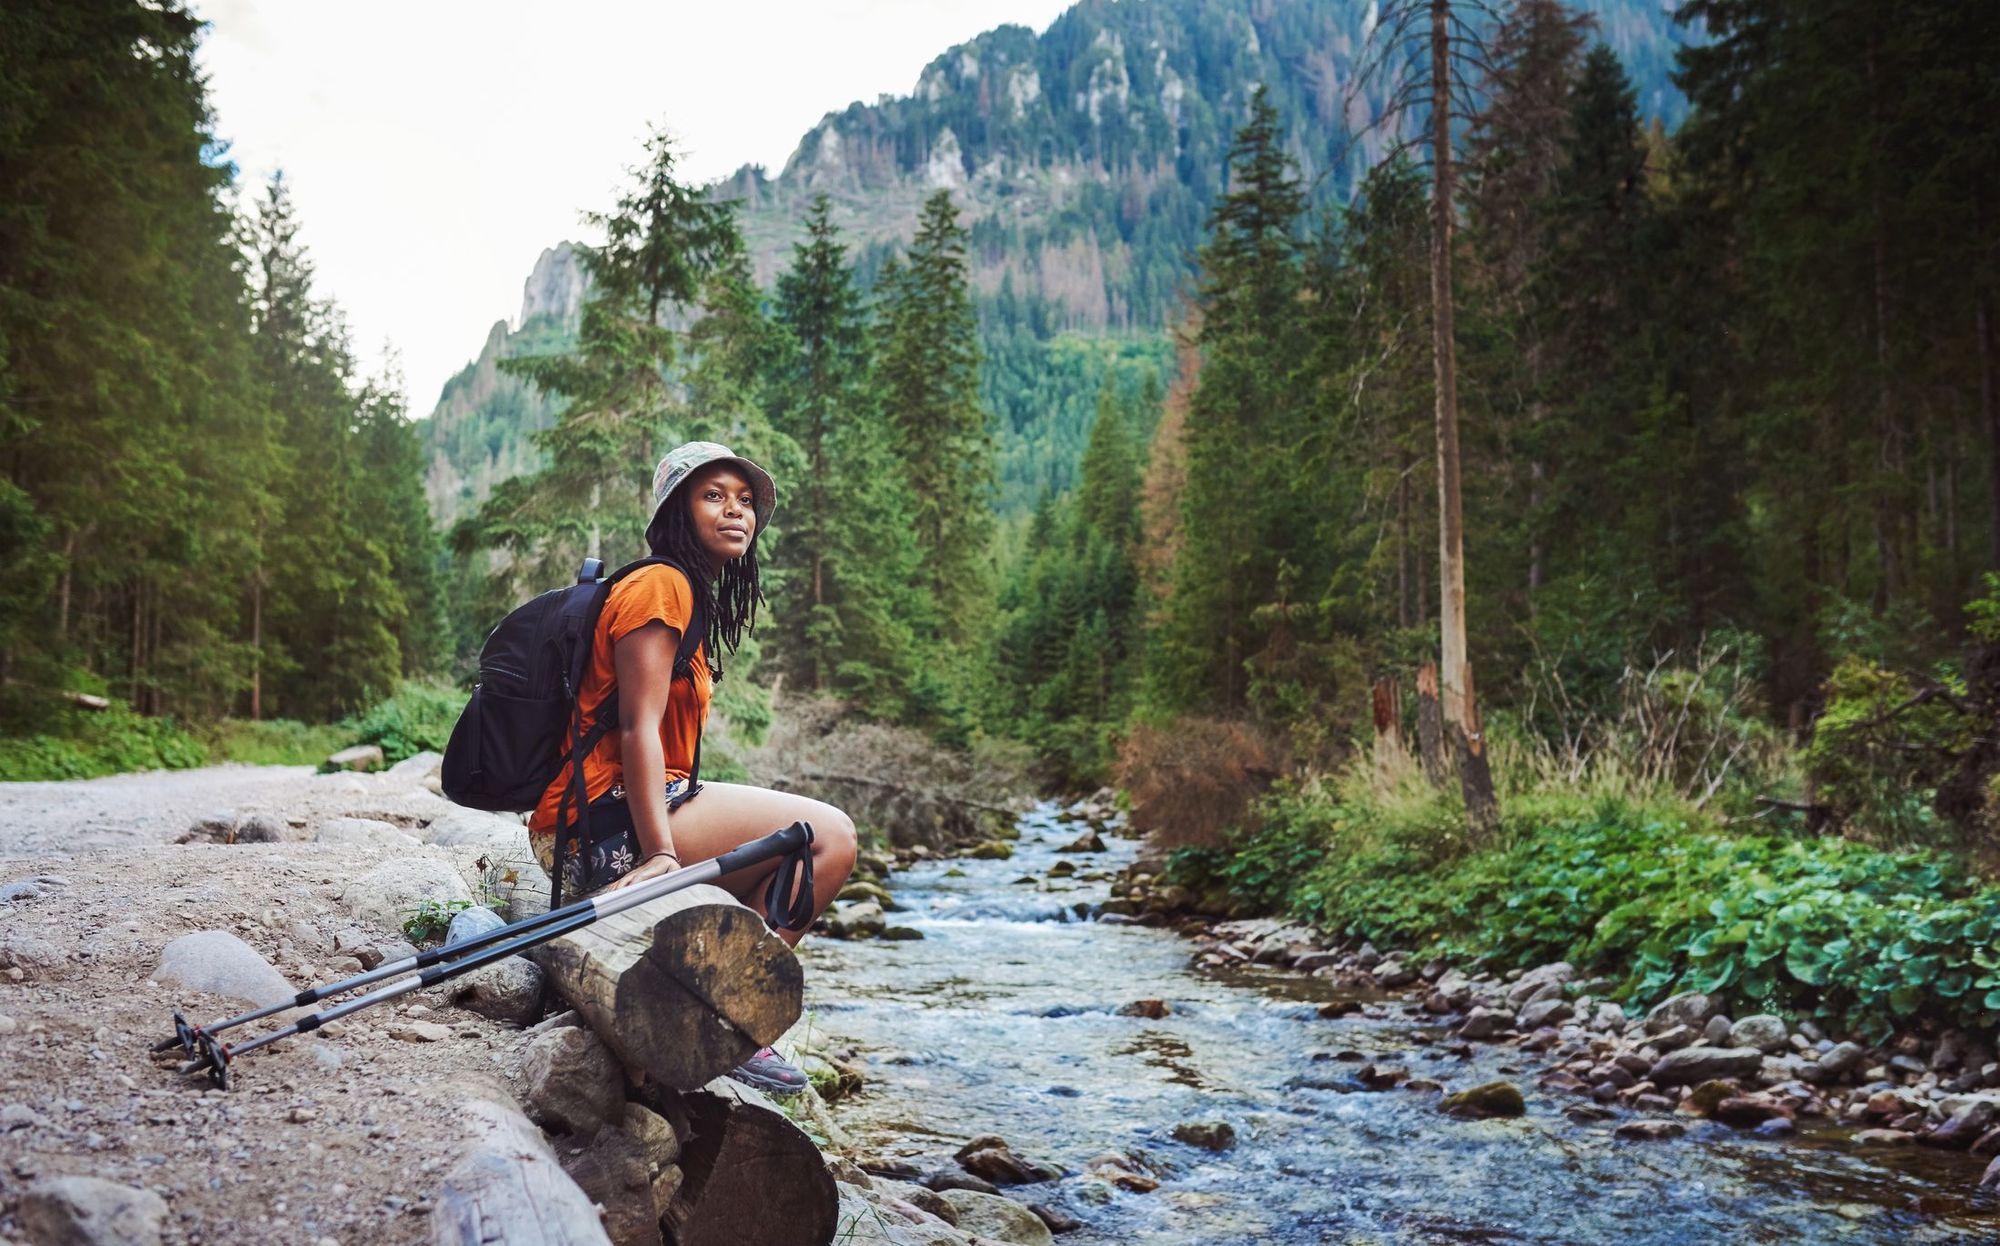 A woman hiker sits on a log by a river, listening quietly